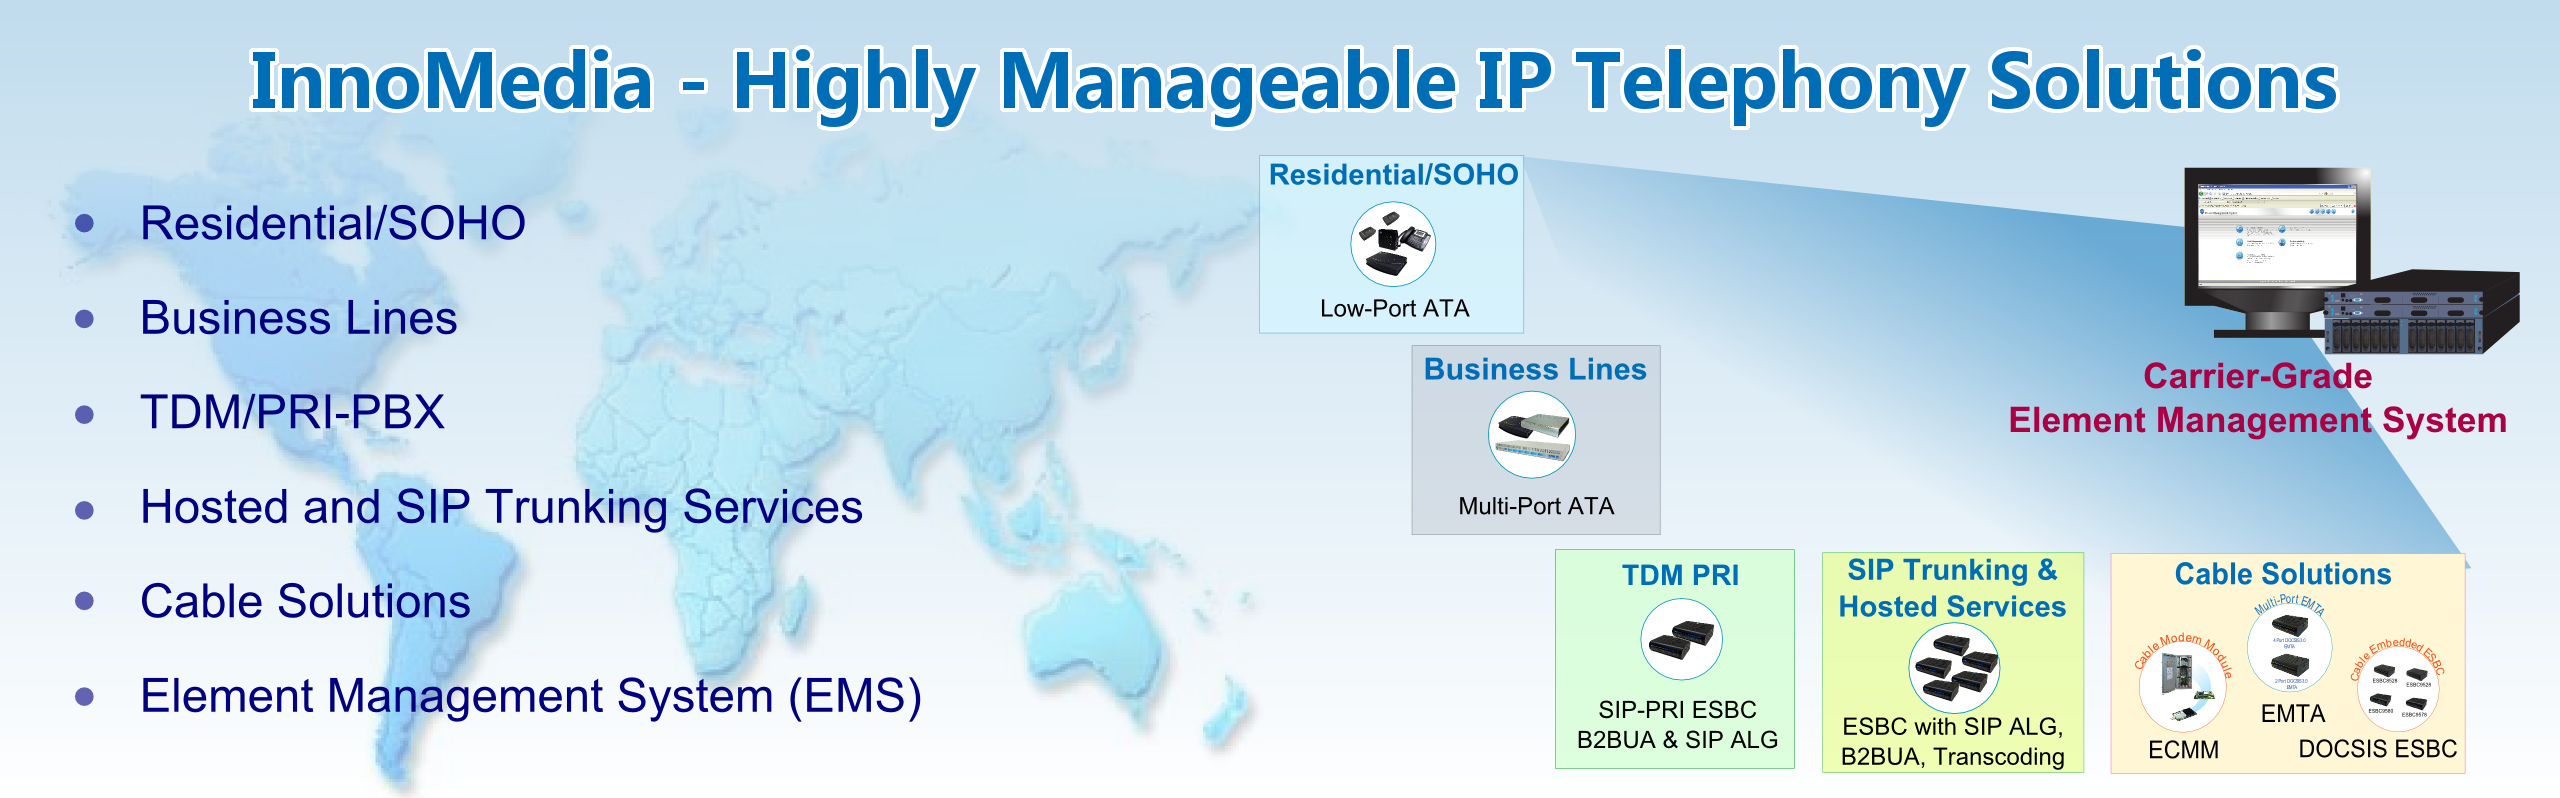 InnoMedia – Highly Manageable IP Telephony Solutions